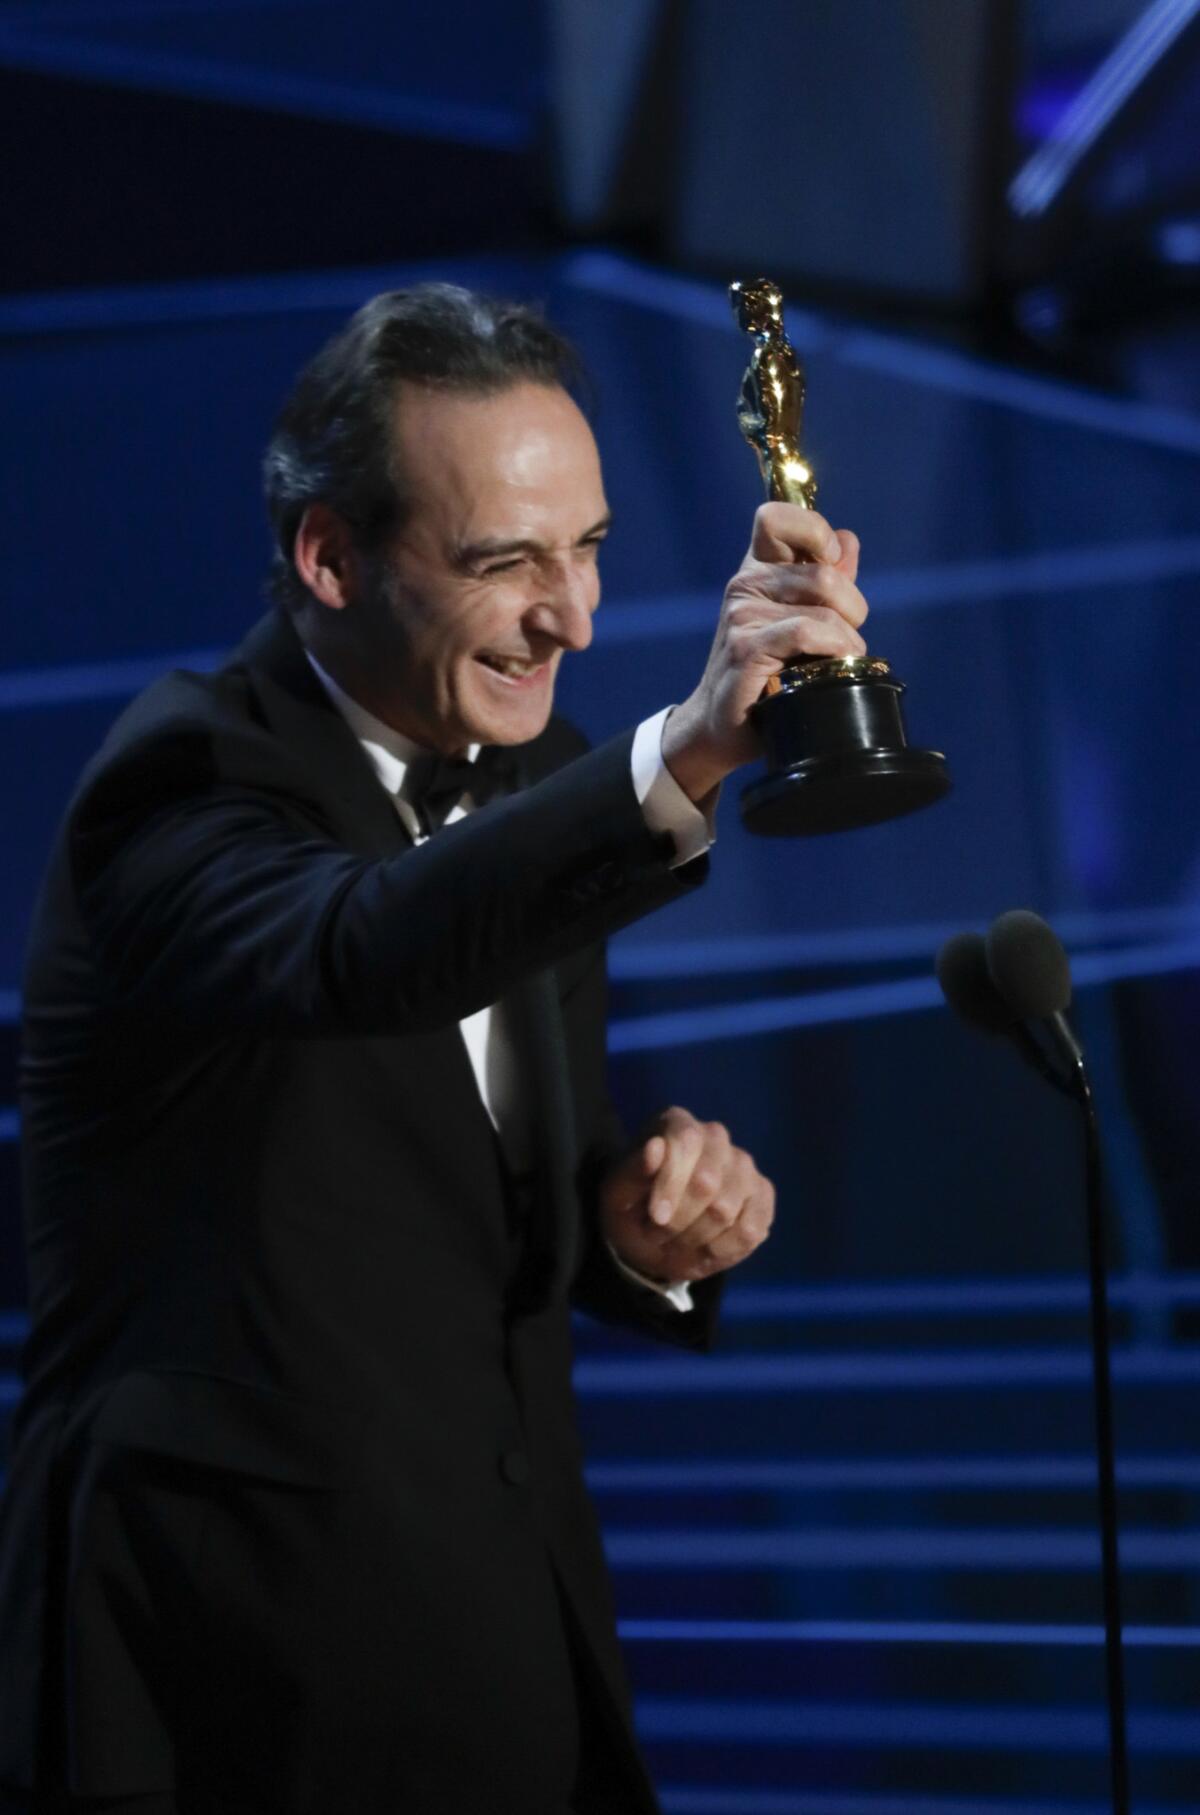 Alexandre Desplat accepting his Oscar for "The Shape of Water's" original score during the 90th Academy Awards on Sunday, March 4, 2018.